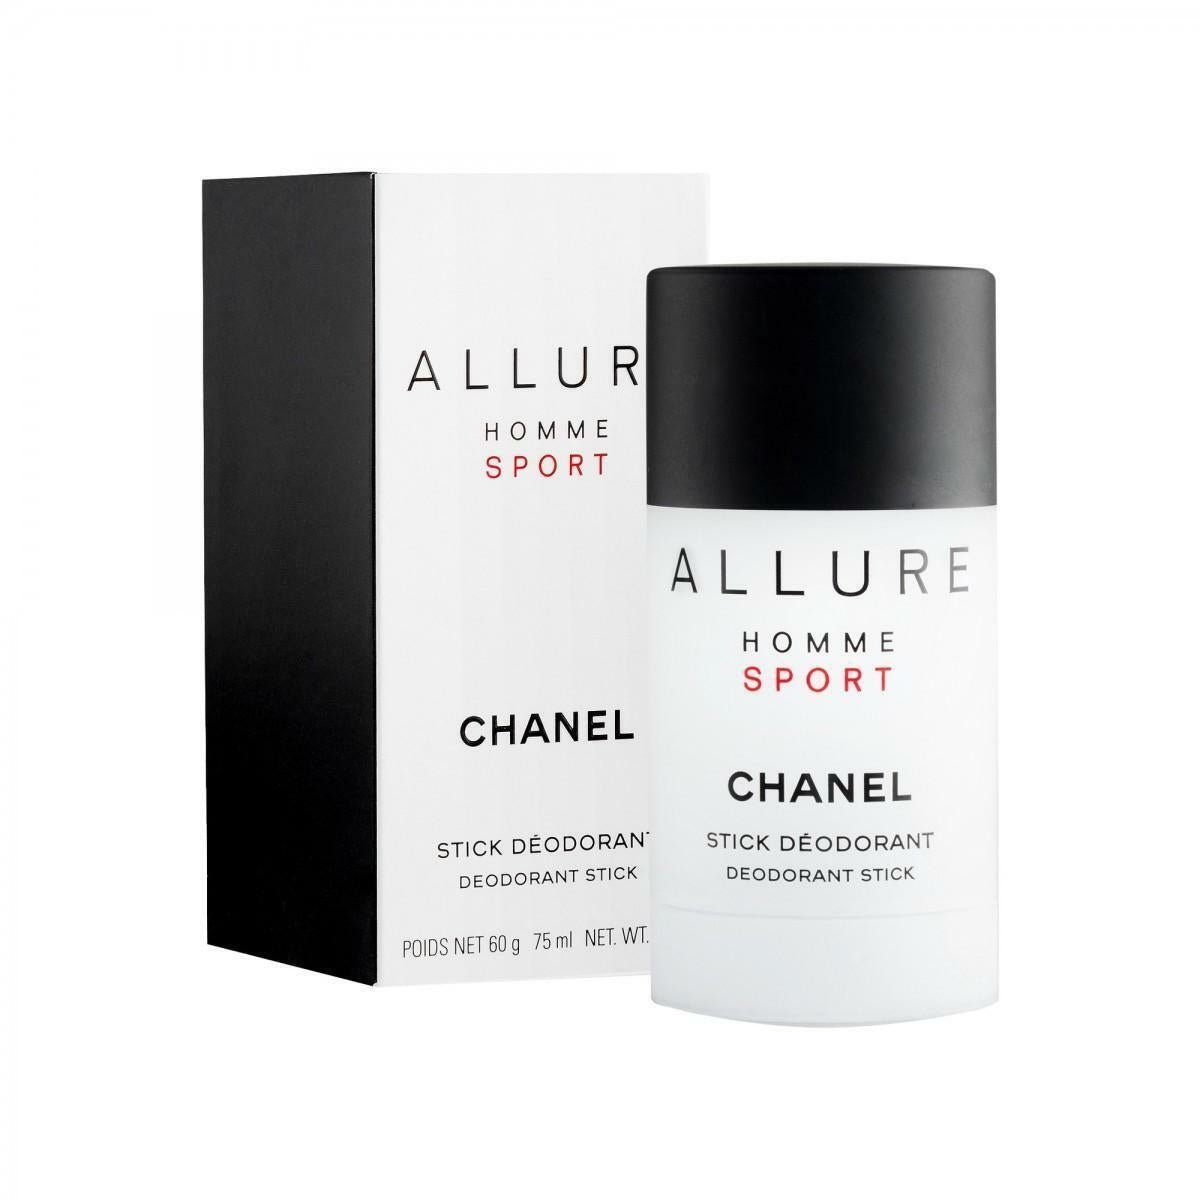 CHANEL ALLURE HOMME SPORT Deodorant Stick Full Size India